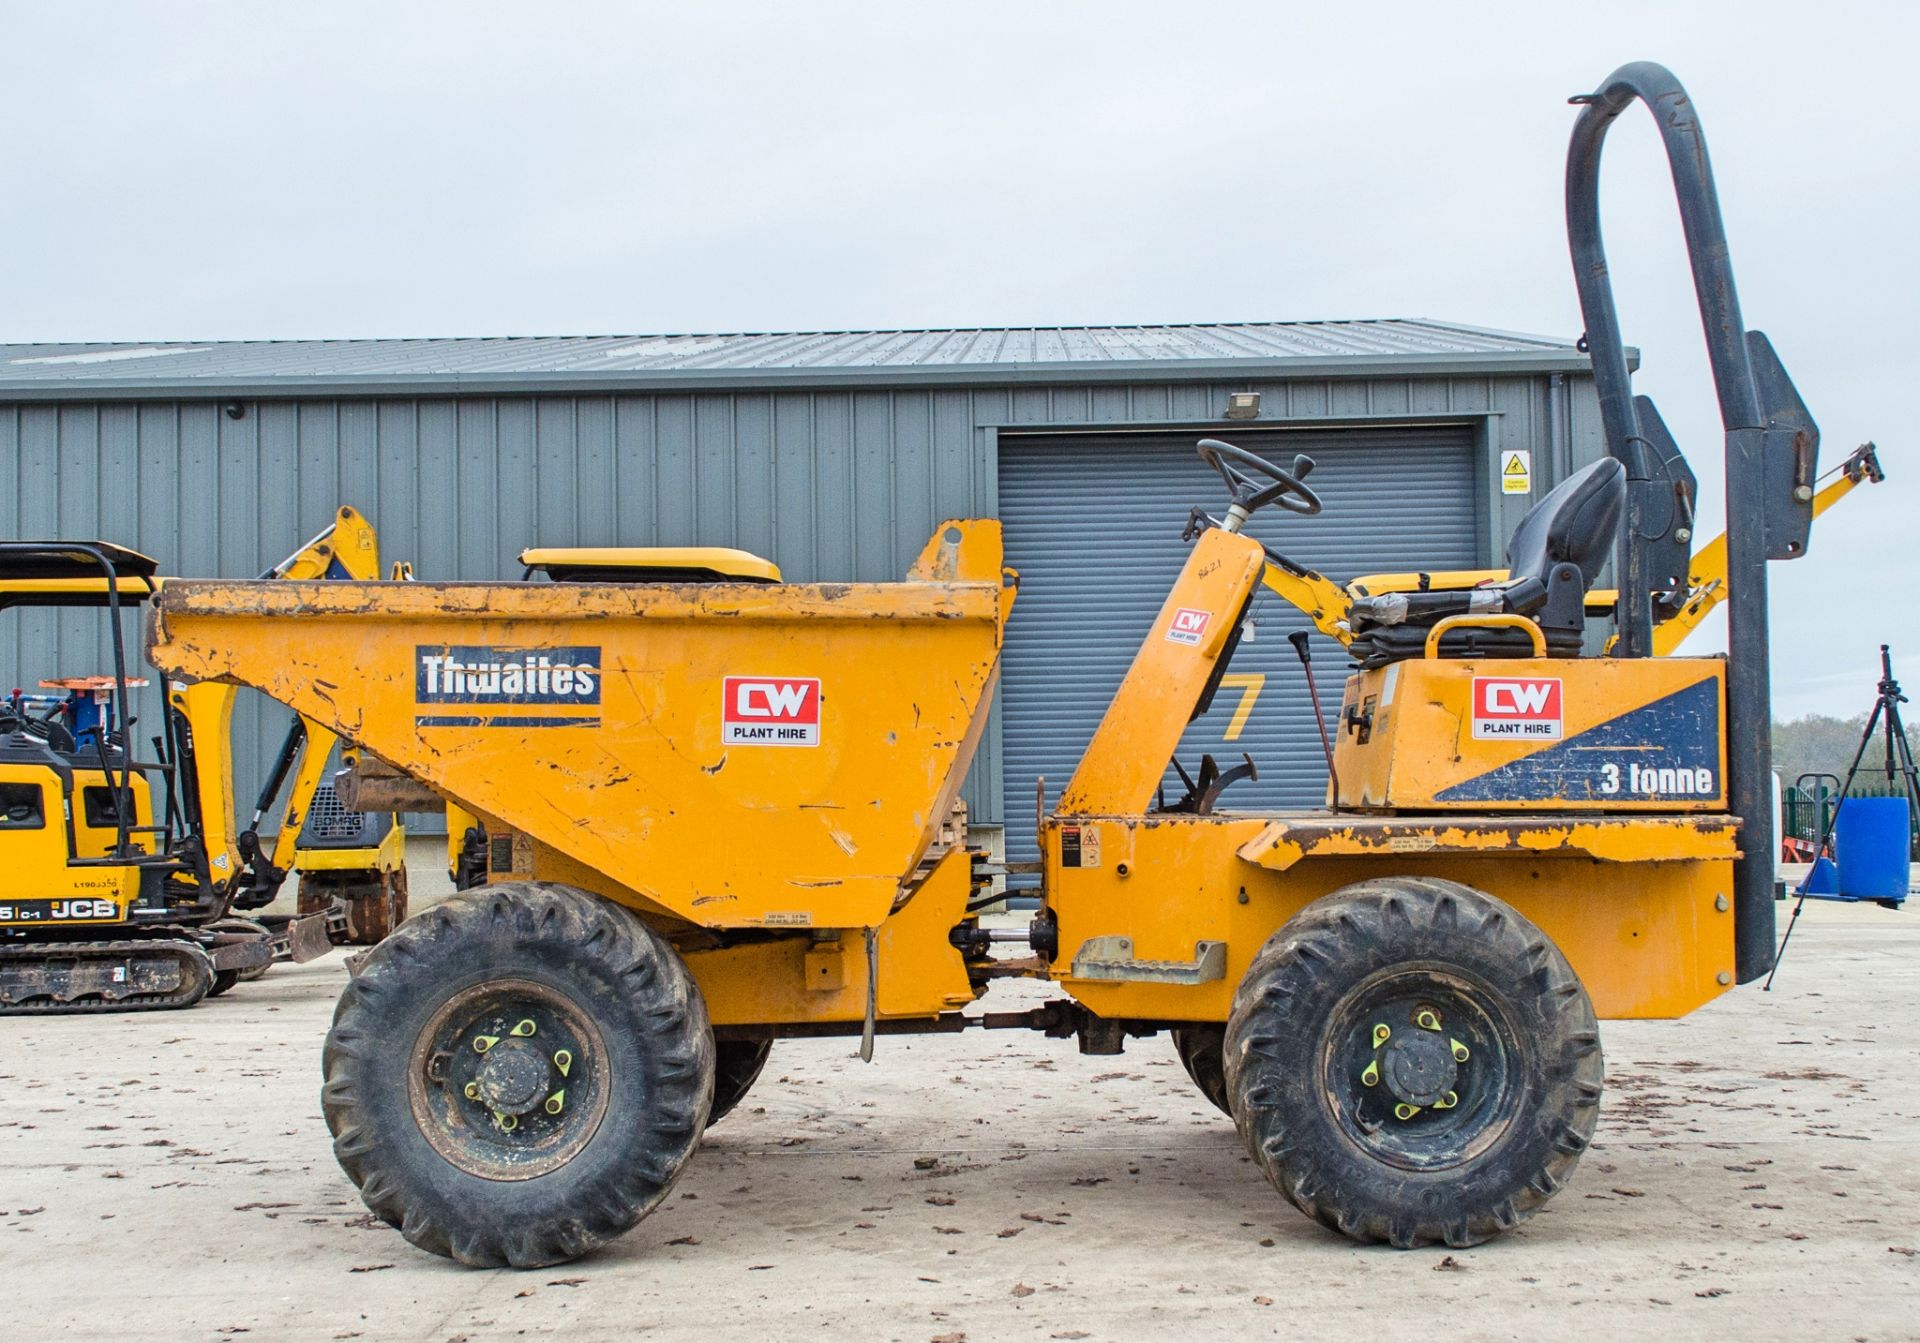 Thwaites 3 tonne straight skip dumper Year: 2016 S/N: 1610D3798 Recorded Hours: Not displayed (Clock - Image 7 of 23